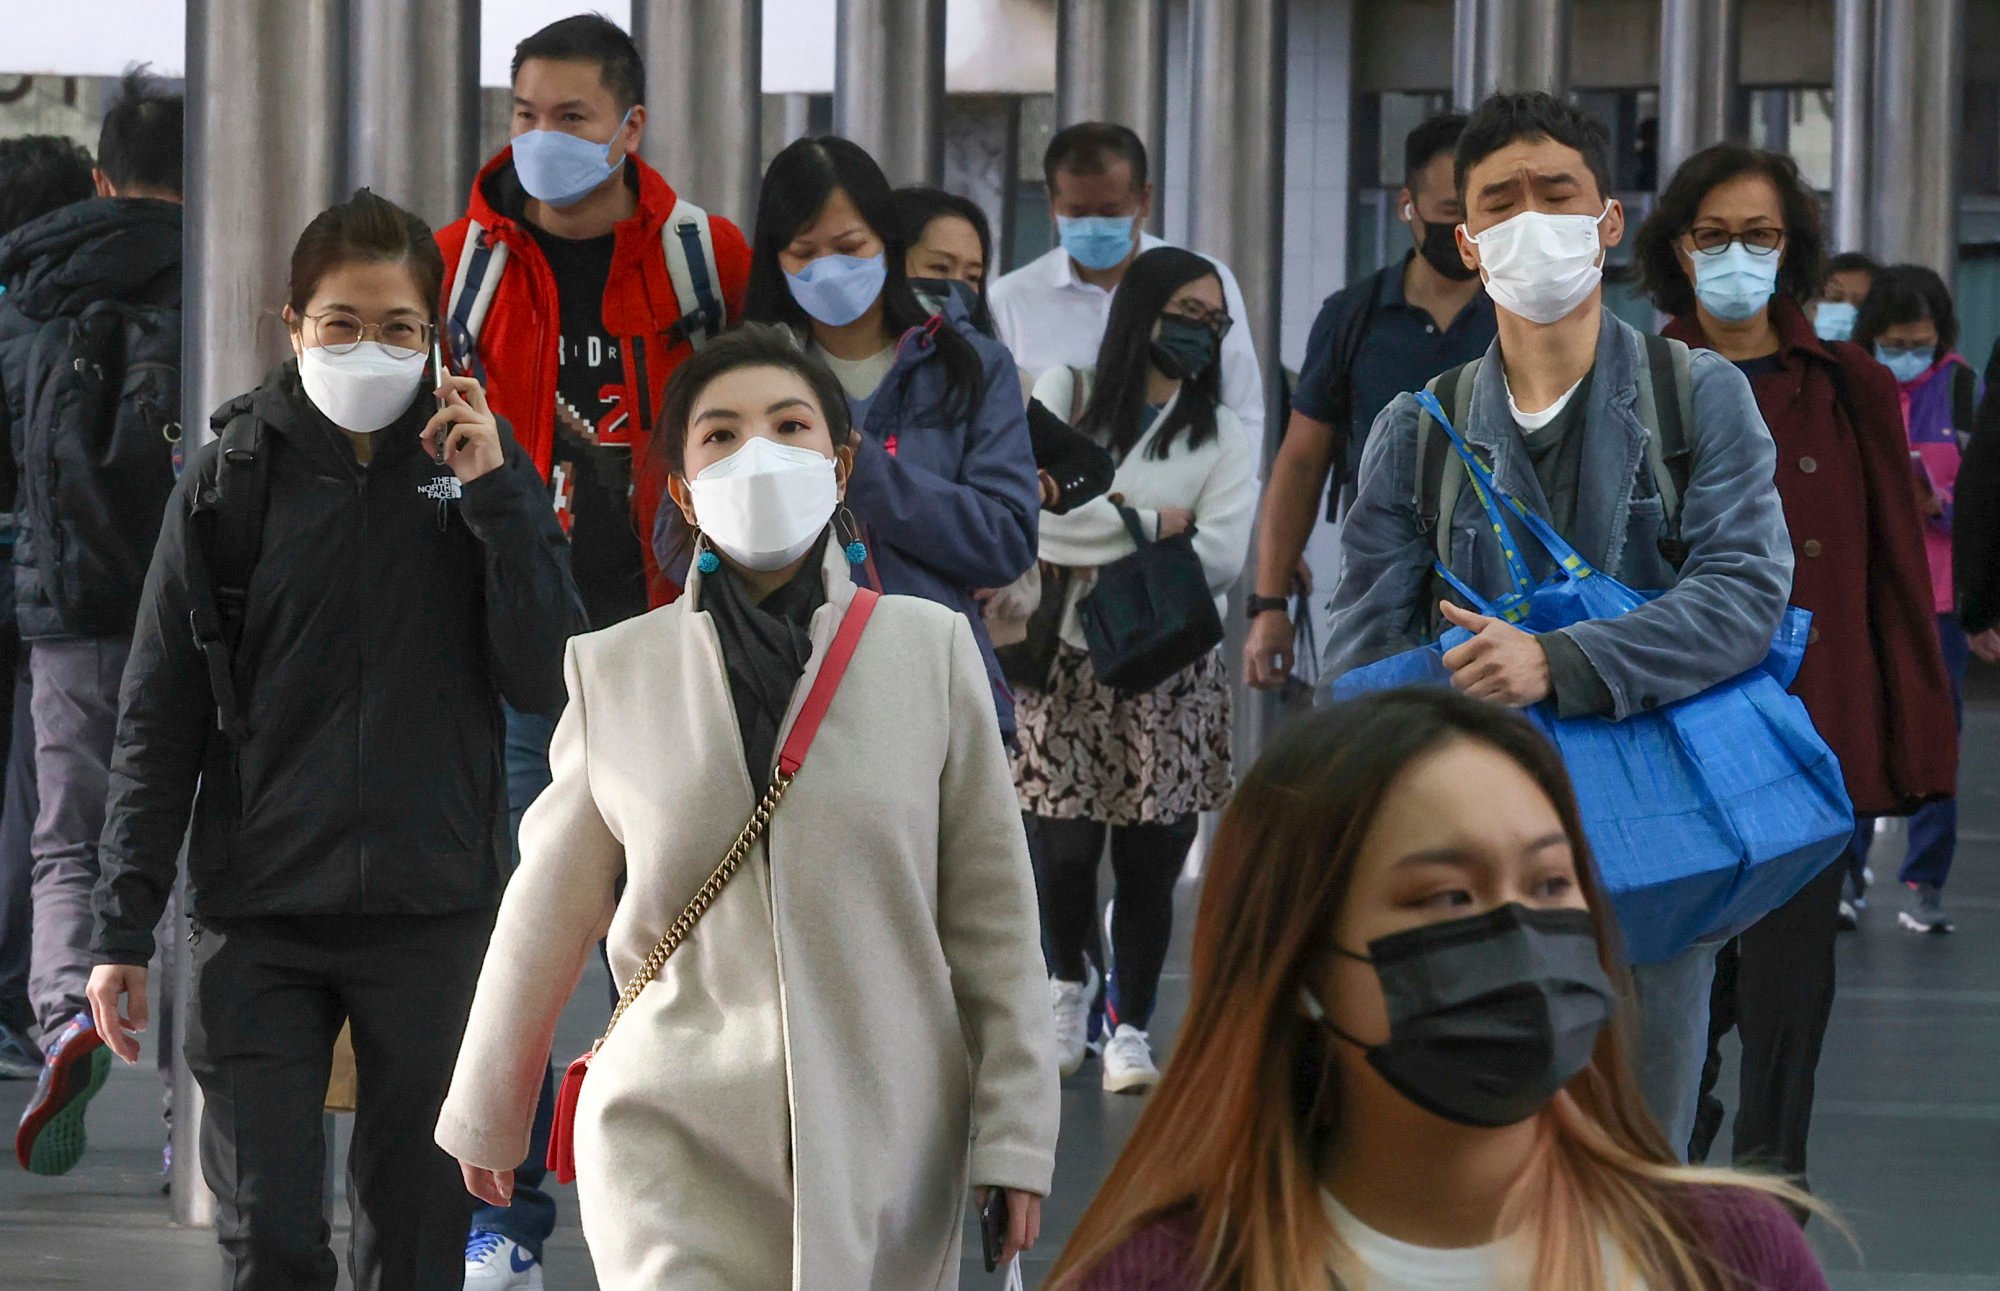 Experts say the current cold weather is conducive for respiratory viruses. Photo: Jonathan Wong